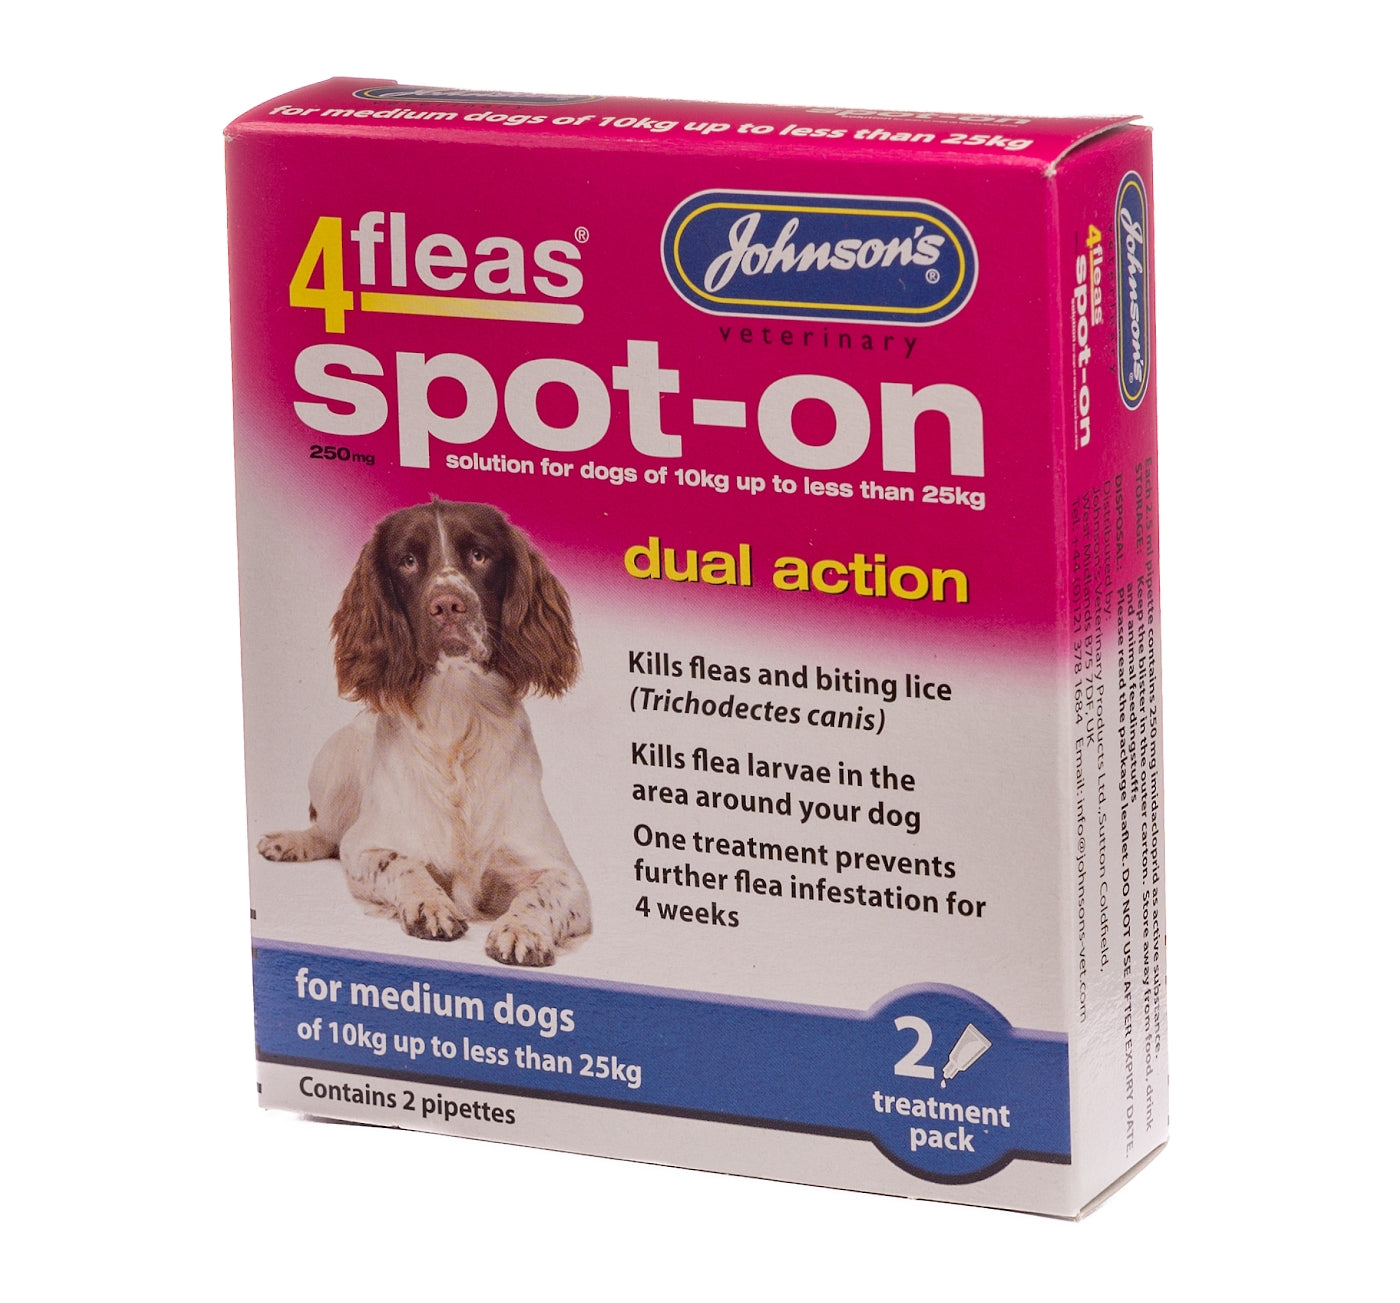 Johnson's - 4fleas Spot-on for Medium Dogs (10-25kg) - 2 x pipettes